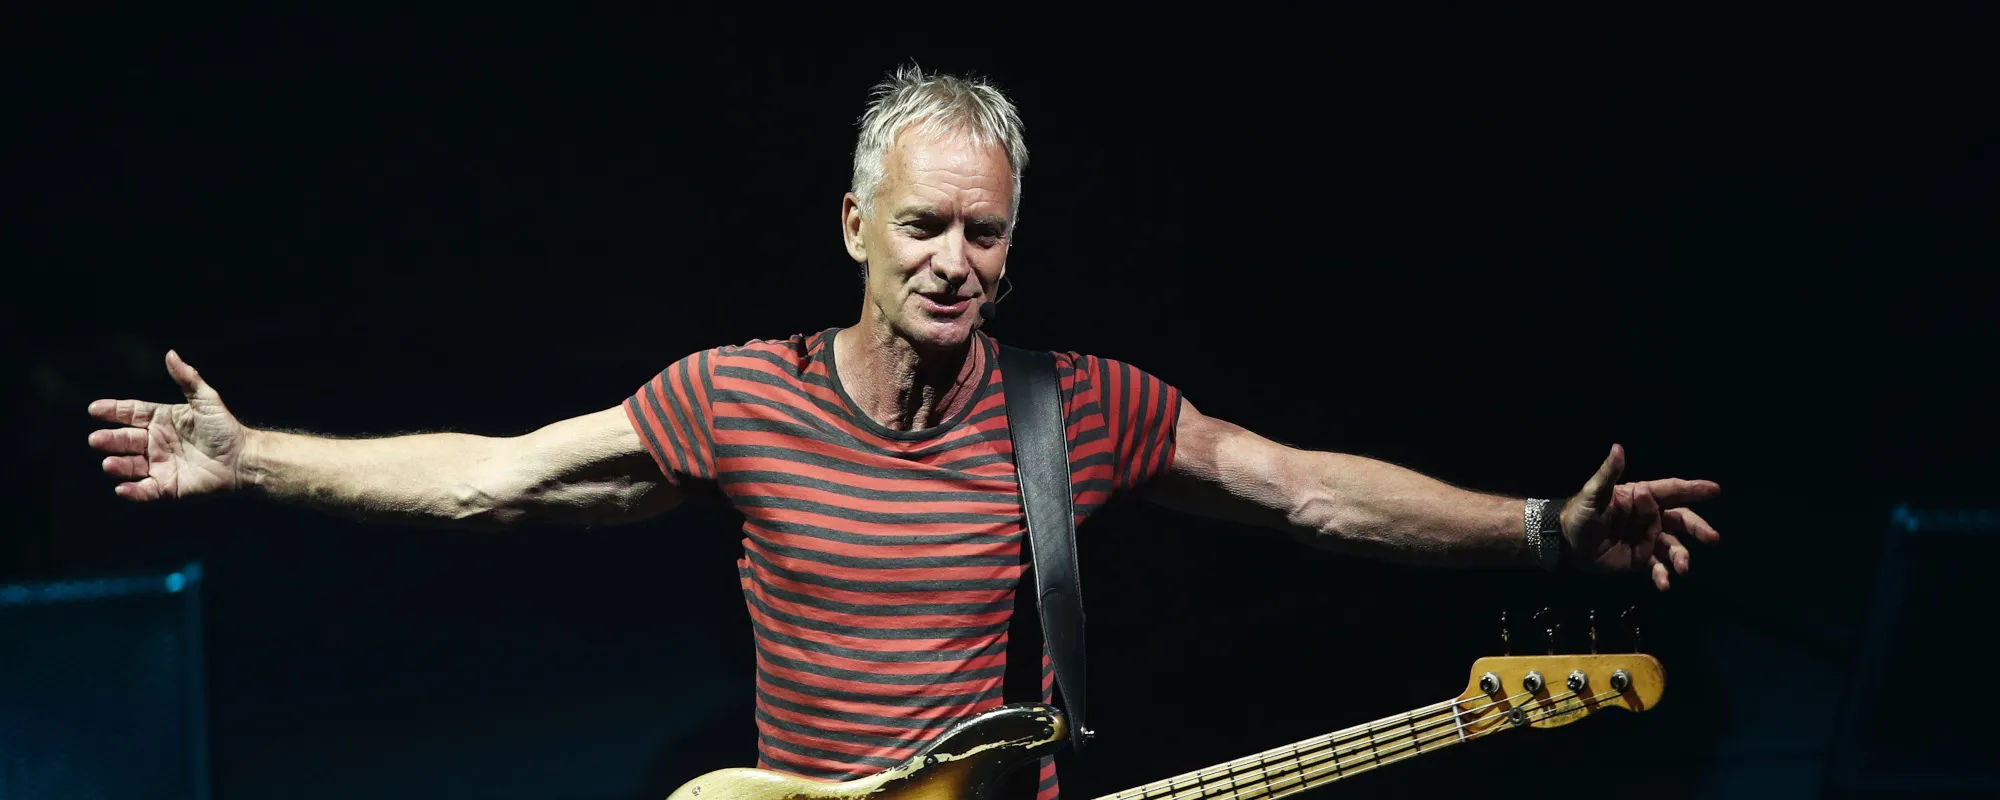 Sting Brings My Songs Tour to North America in 2023 with Son Joe Sumner